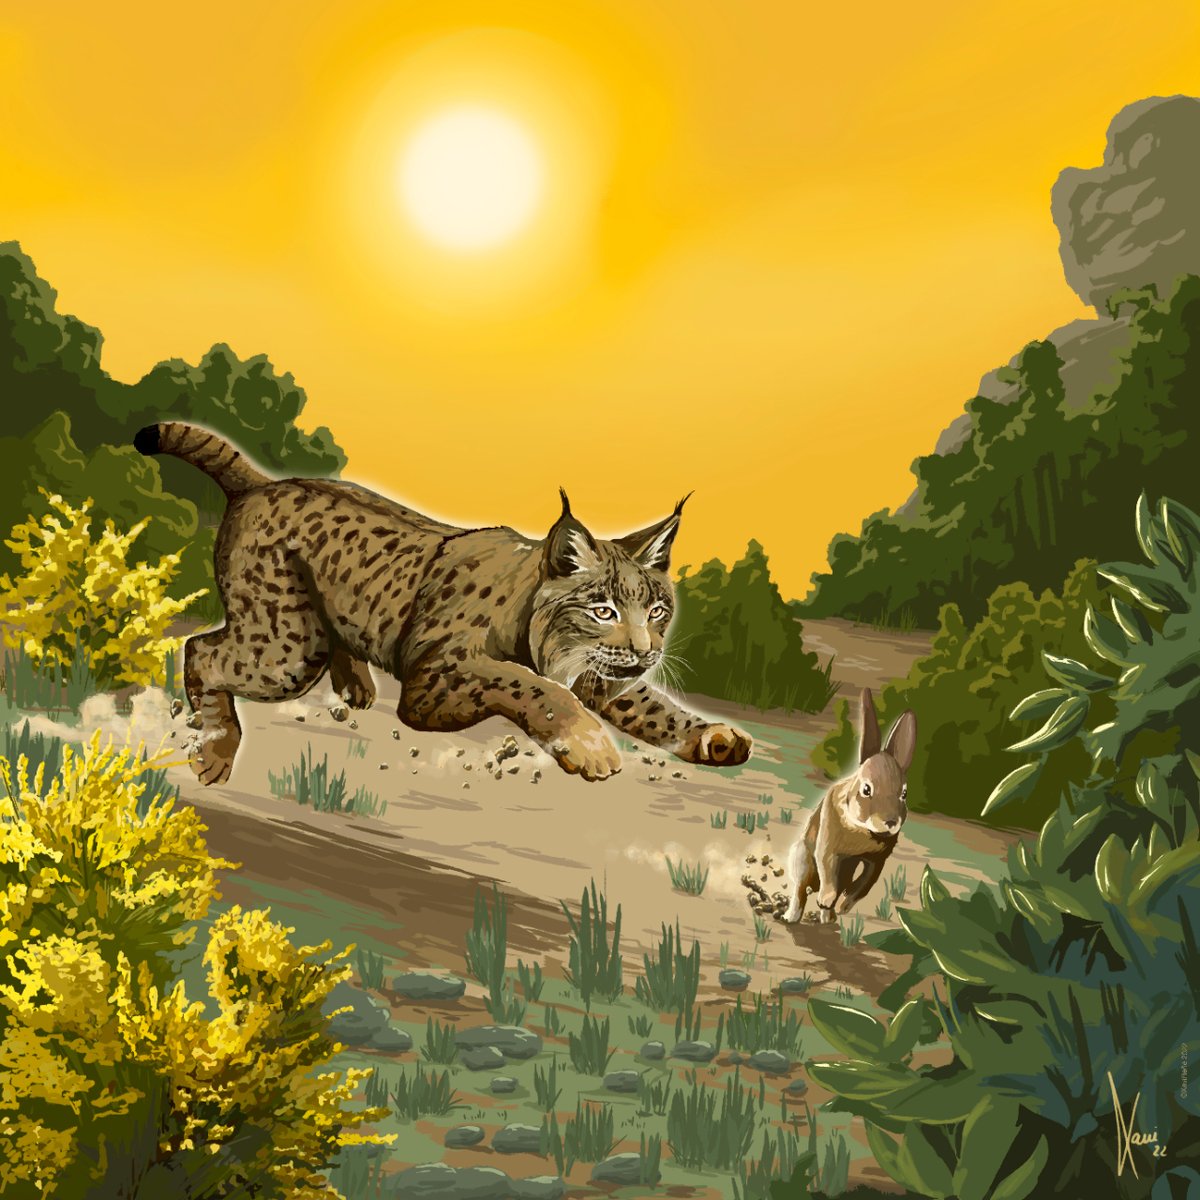 As part of our #WildlifeComeback month, we highlight some species recovering and the reasons we need to #WelcomeWildlife back.

Today we focus on the Iberian lynx! If you want to learn more about the comeback of this predator, wait for the #WildlifeComebackReport in September 27!